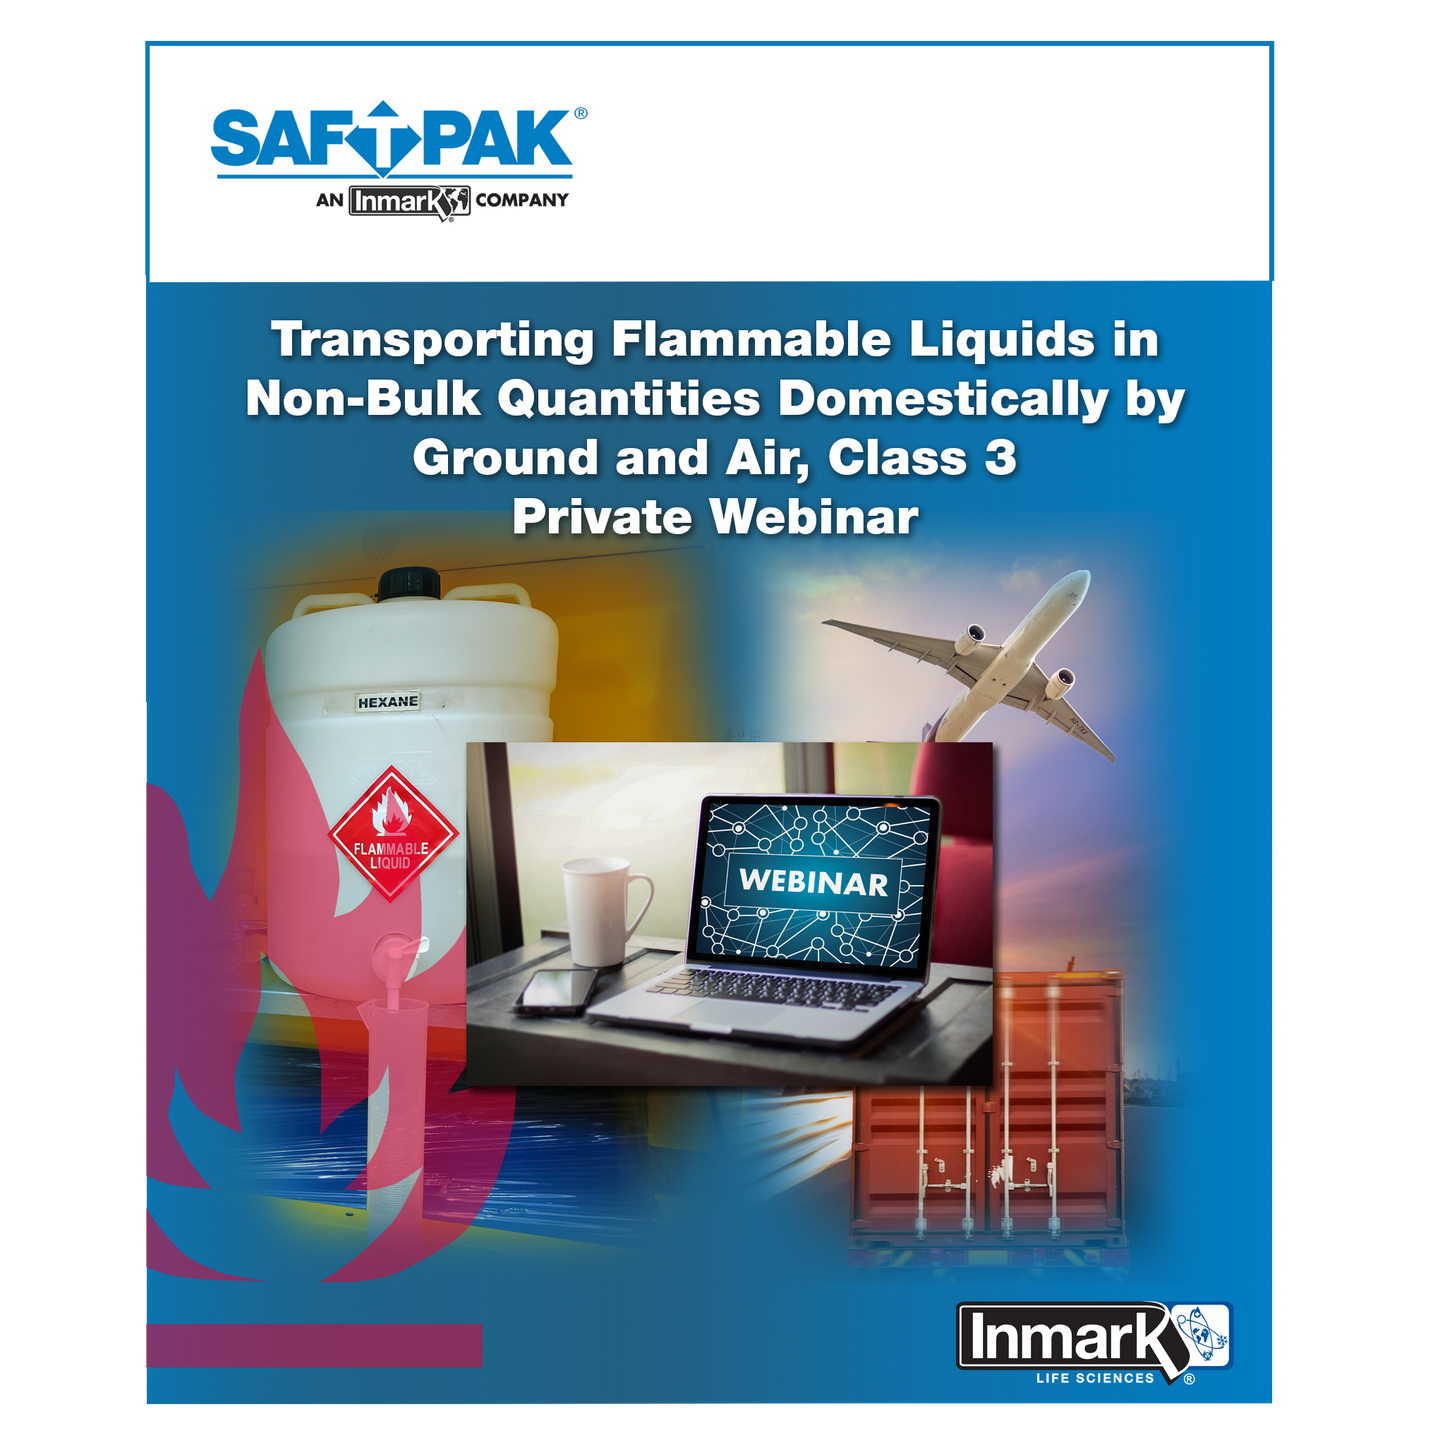 Transporting Flammable Material In Non-Bulk Quantities Domestically and Internationally By Ground and Air (Class 3) - Private Webinar